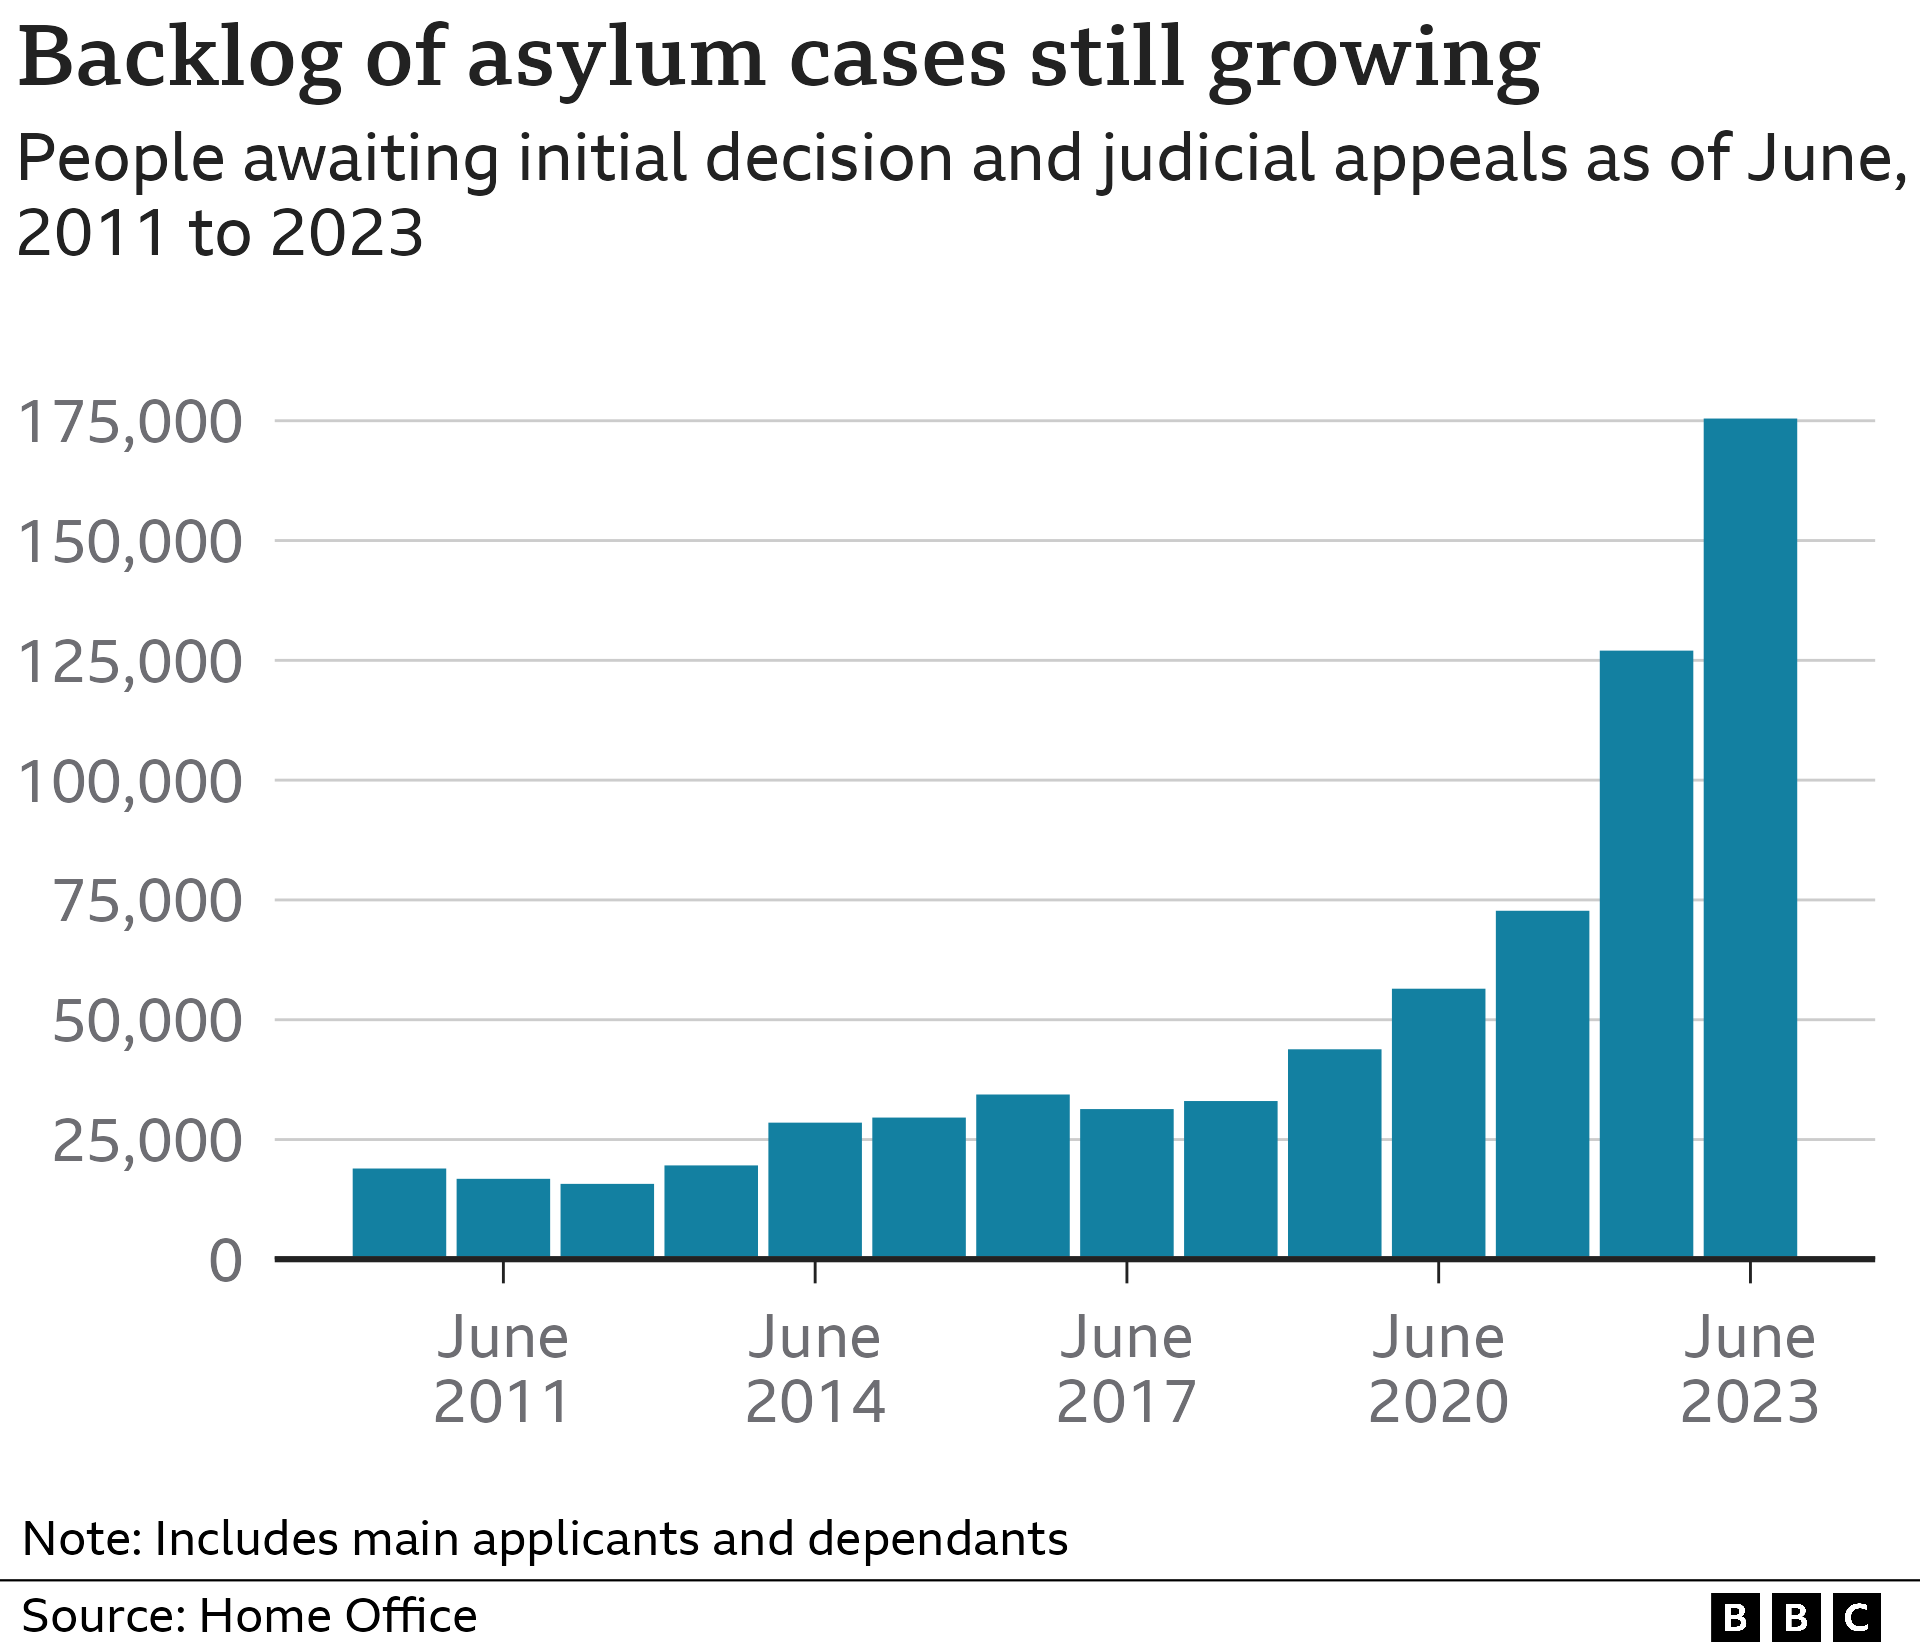 Chart showing the backlog of asylum cases (June 2023)